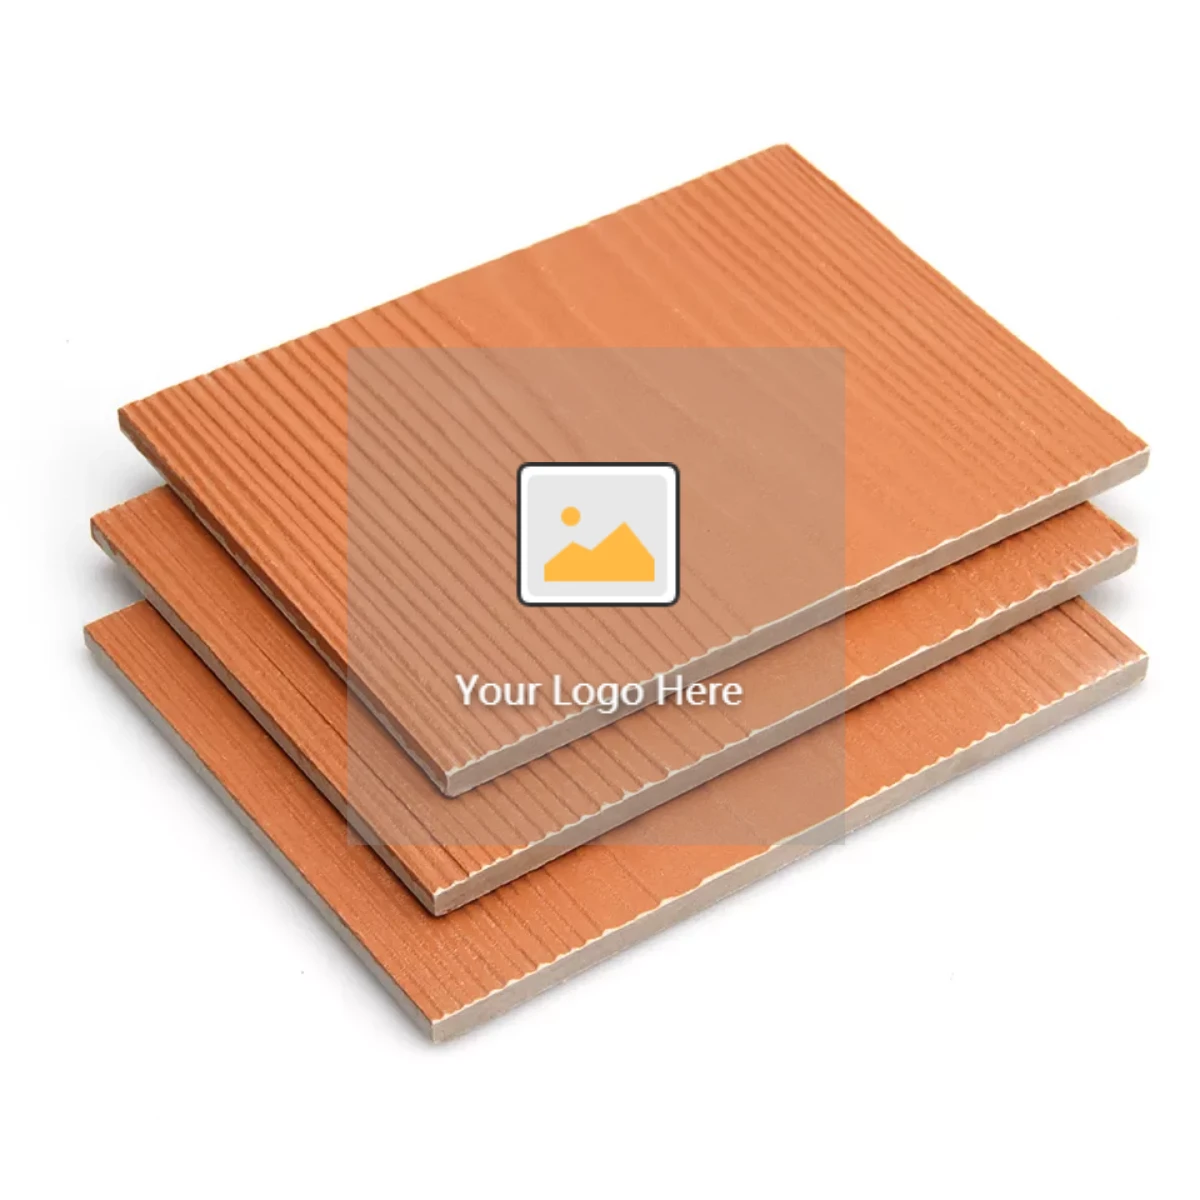 6mm Fire proof  Reinforced standard cellulose Non-asbestos fiber cement boards